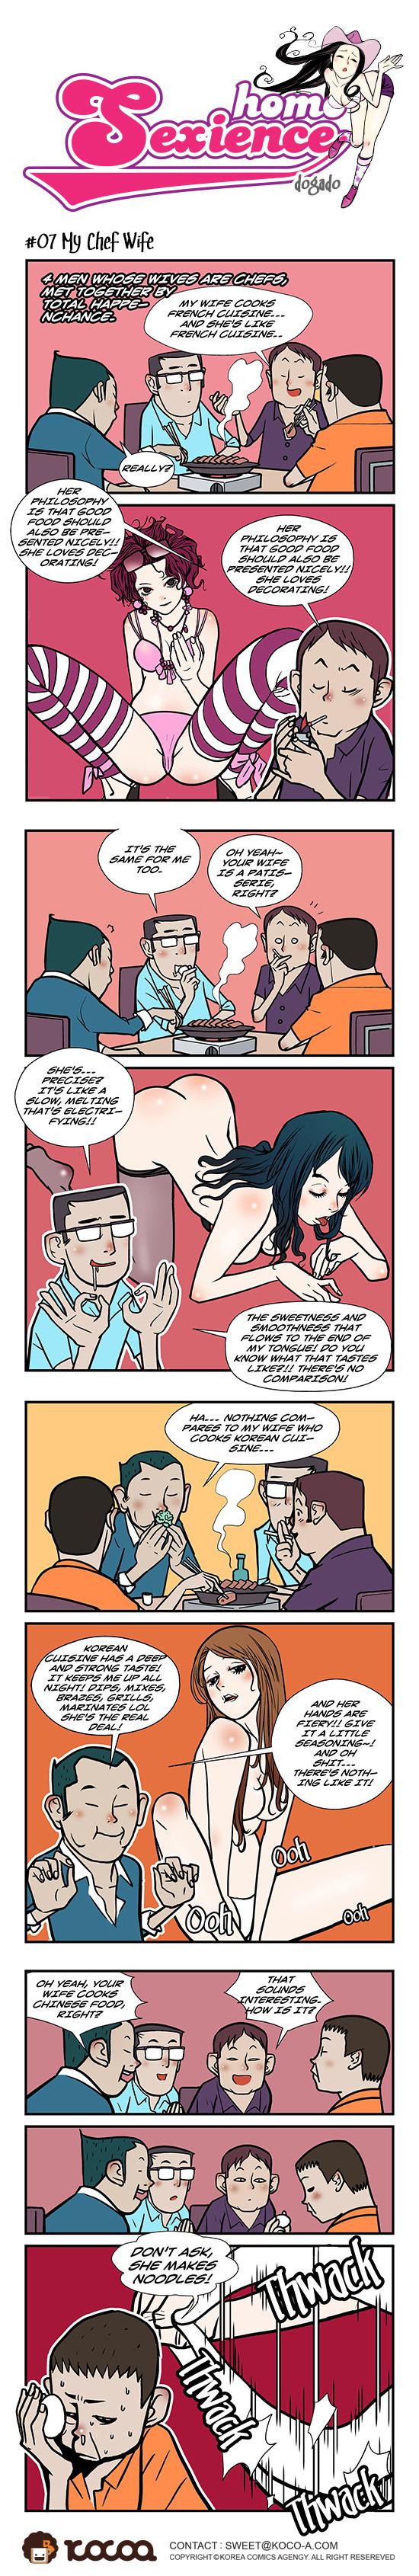 With Homo Sexience Wife - Page 7